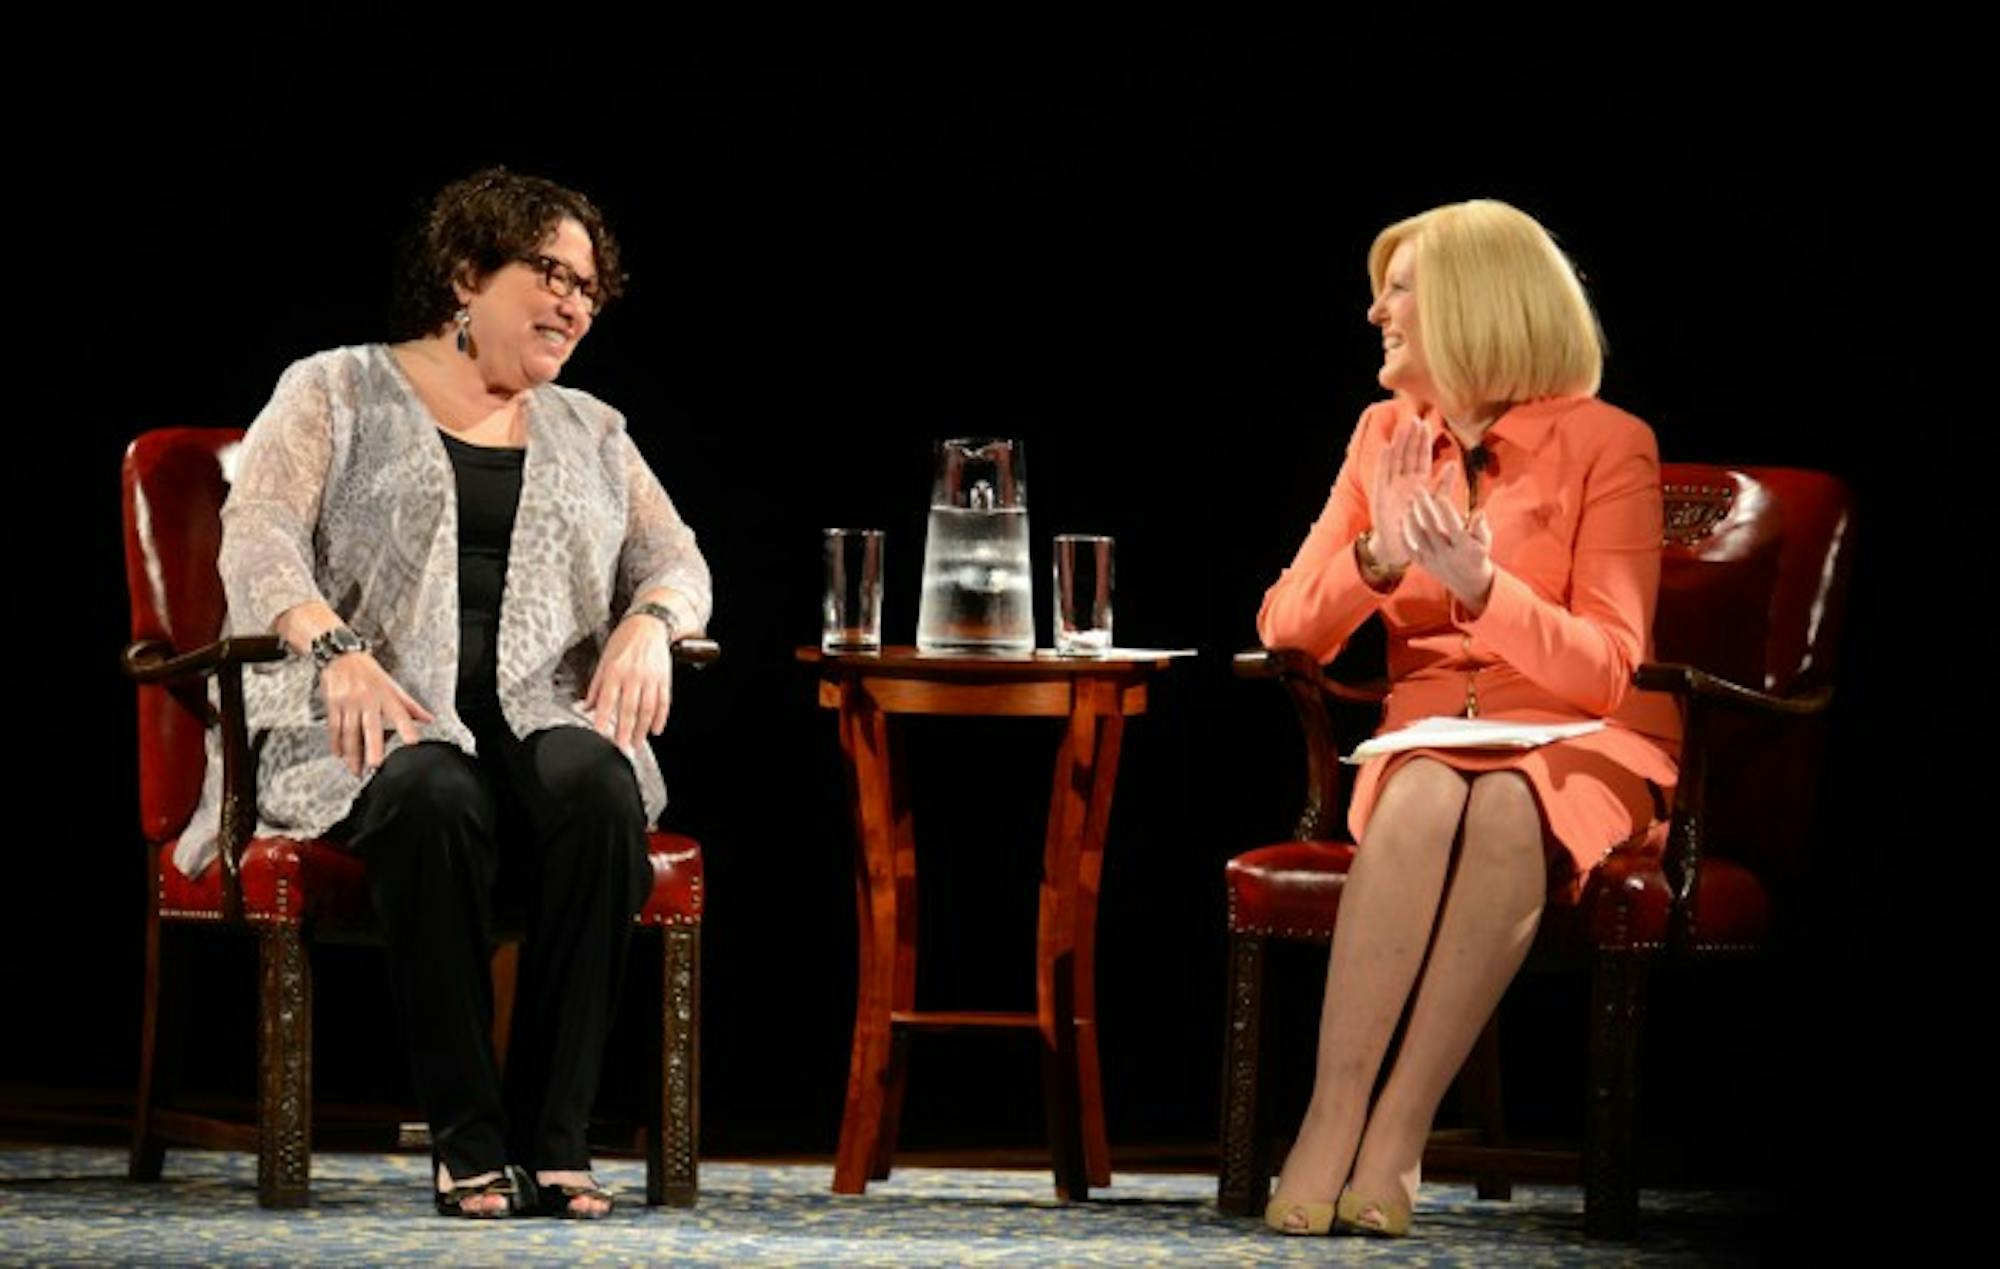 Supreme Court Justice Sonia Sotomayor, left, converses with NBC news correspondent Anne Thompson, a member of the Notre Dame class of 1979, on Wednesday night in the DeBartolo Performing Arts Center.